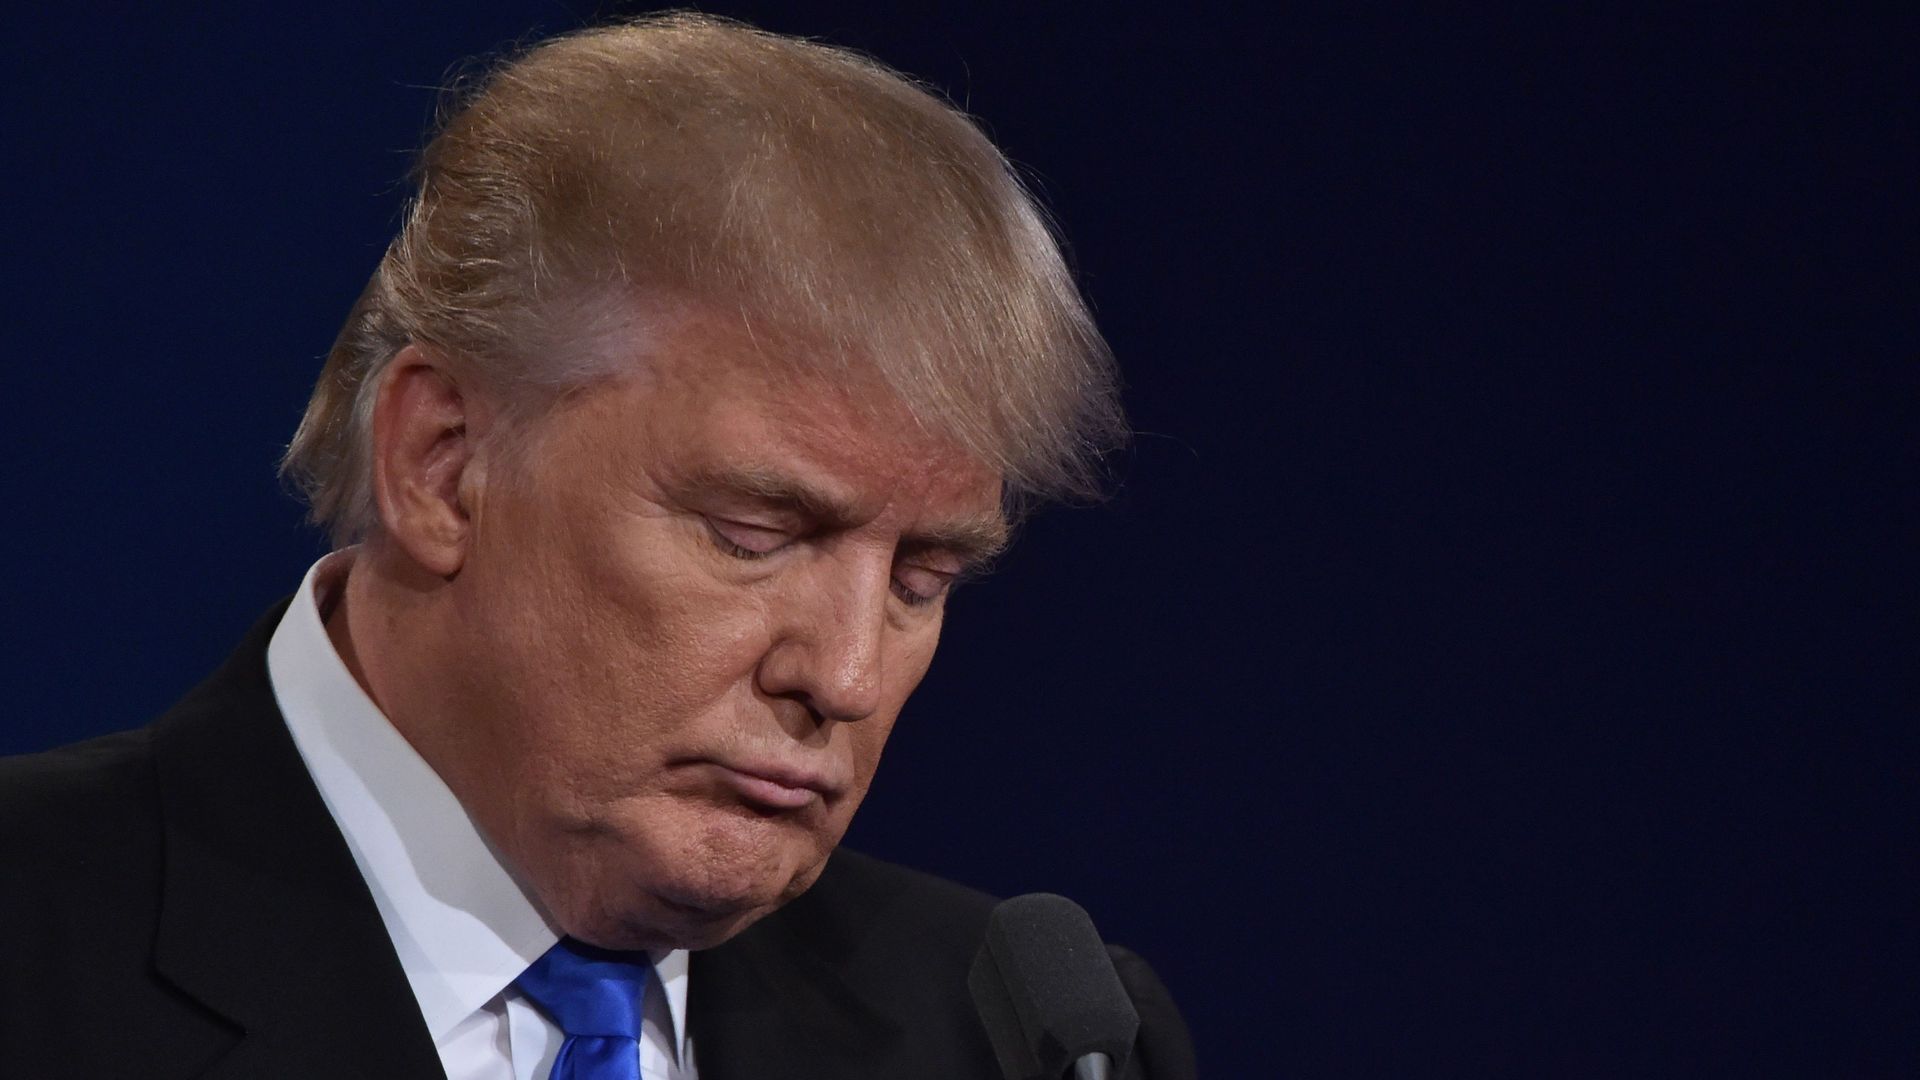 Donald Trump looking sad with his face down